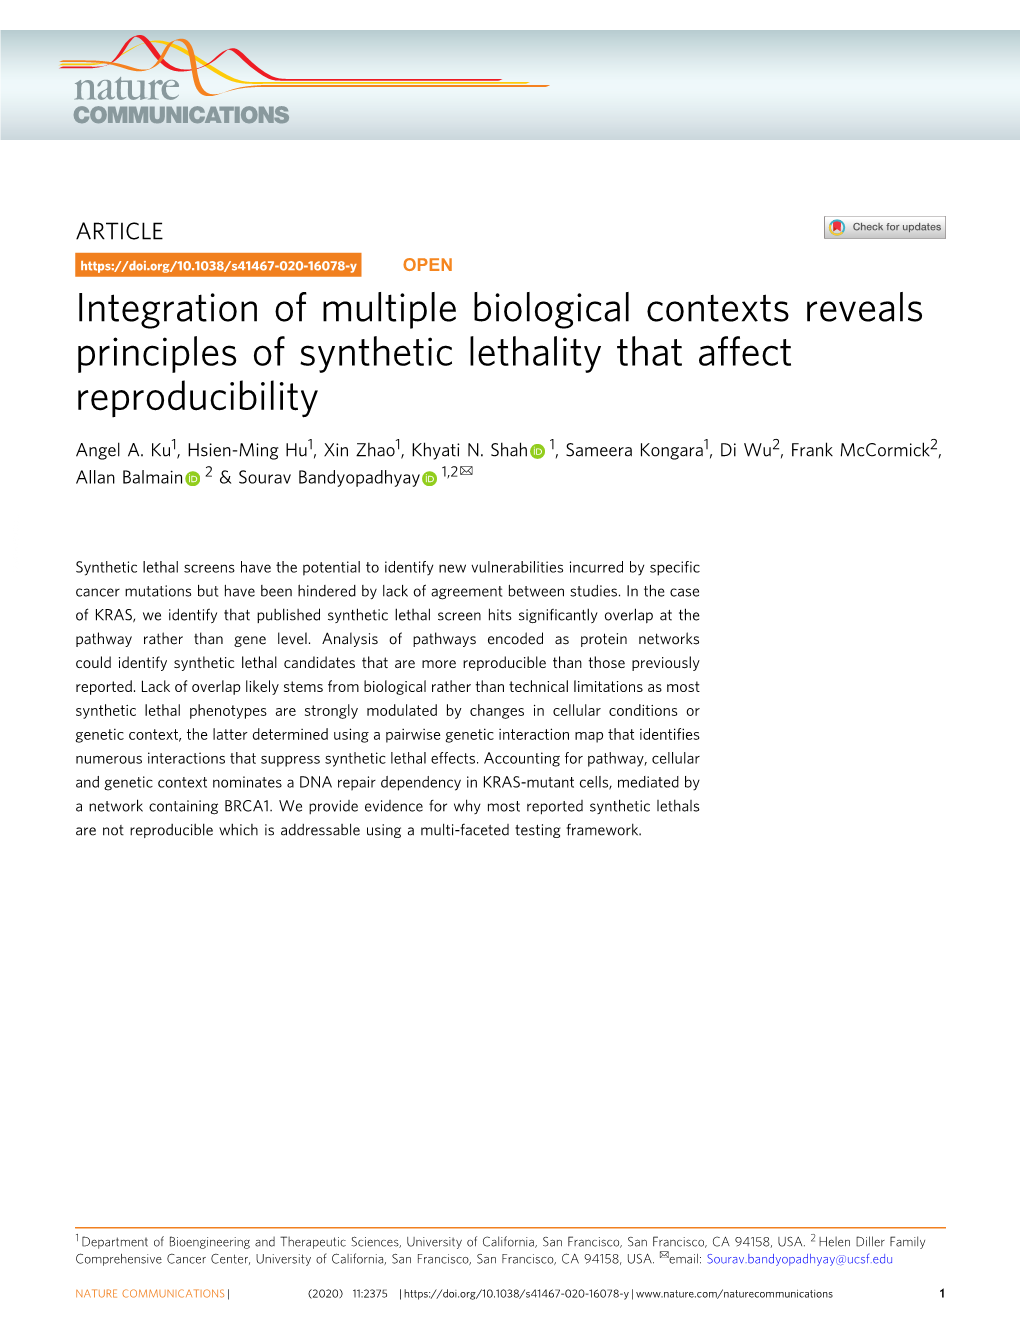 Integration of Multiple Biological Contexts Reveals Principles of Synthetic Lethality That Affect Reproducibility